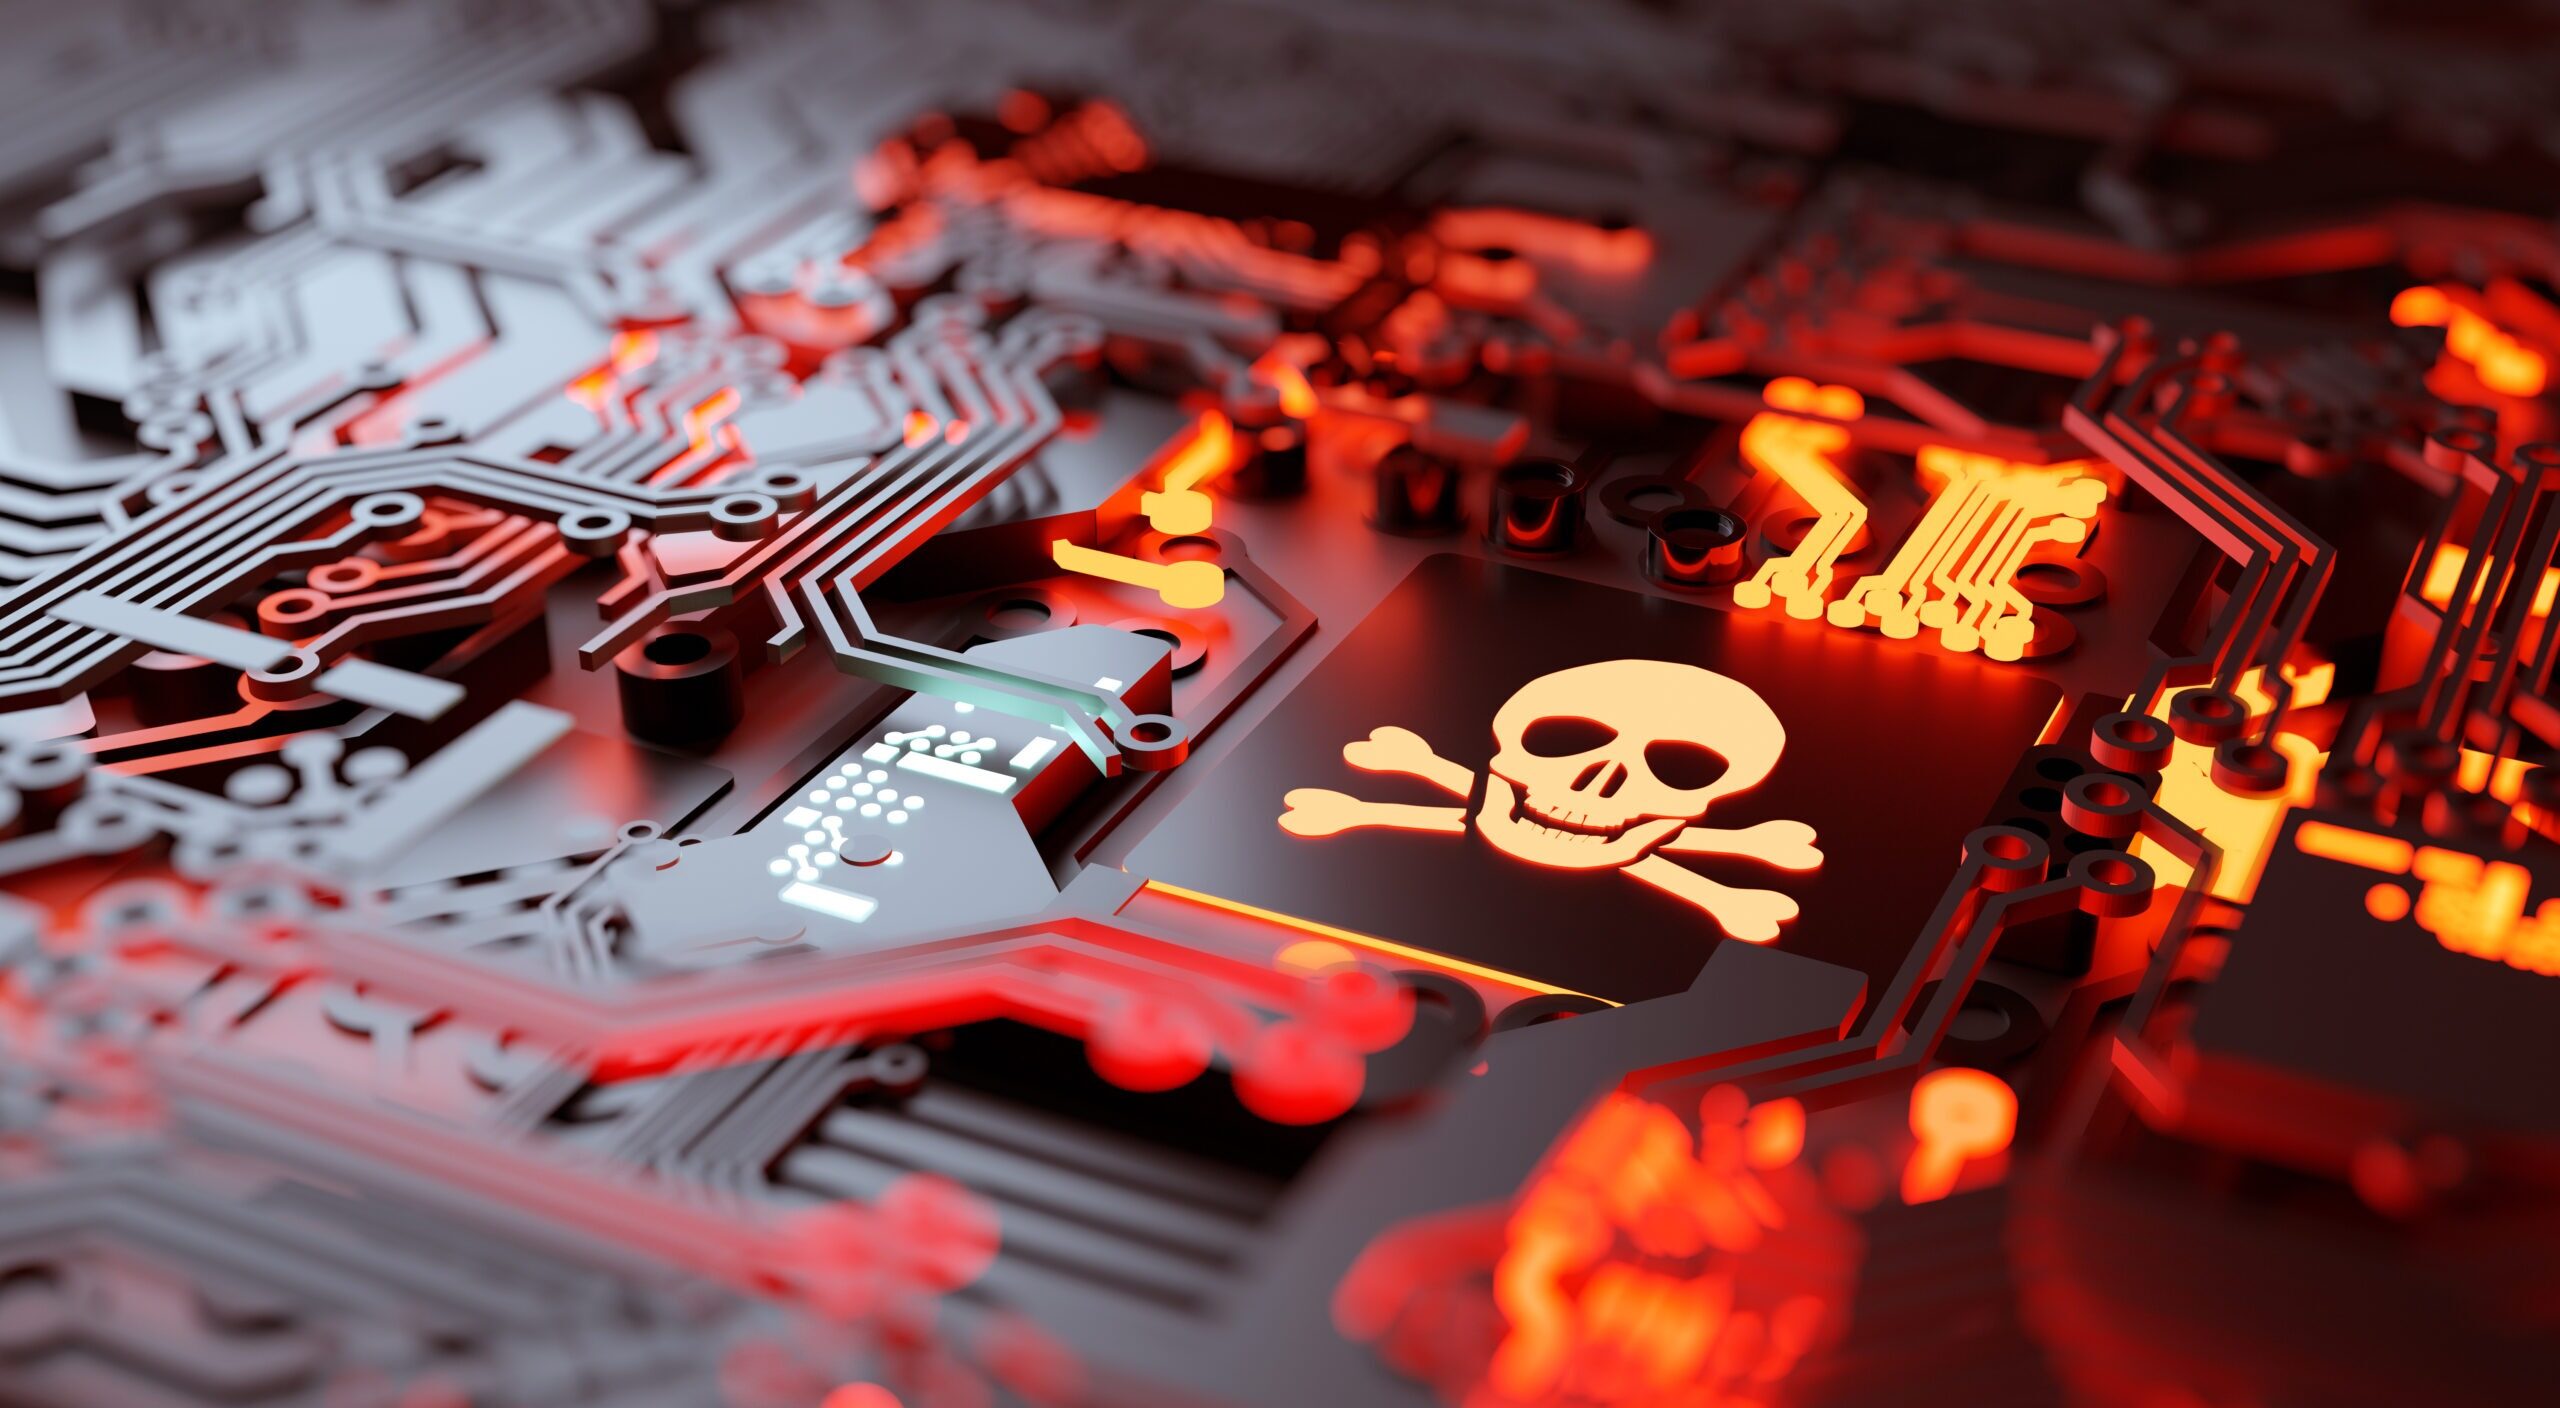 Vulnerable computer hardware being hacked and network ransomware digital cybercrime background concept